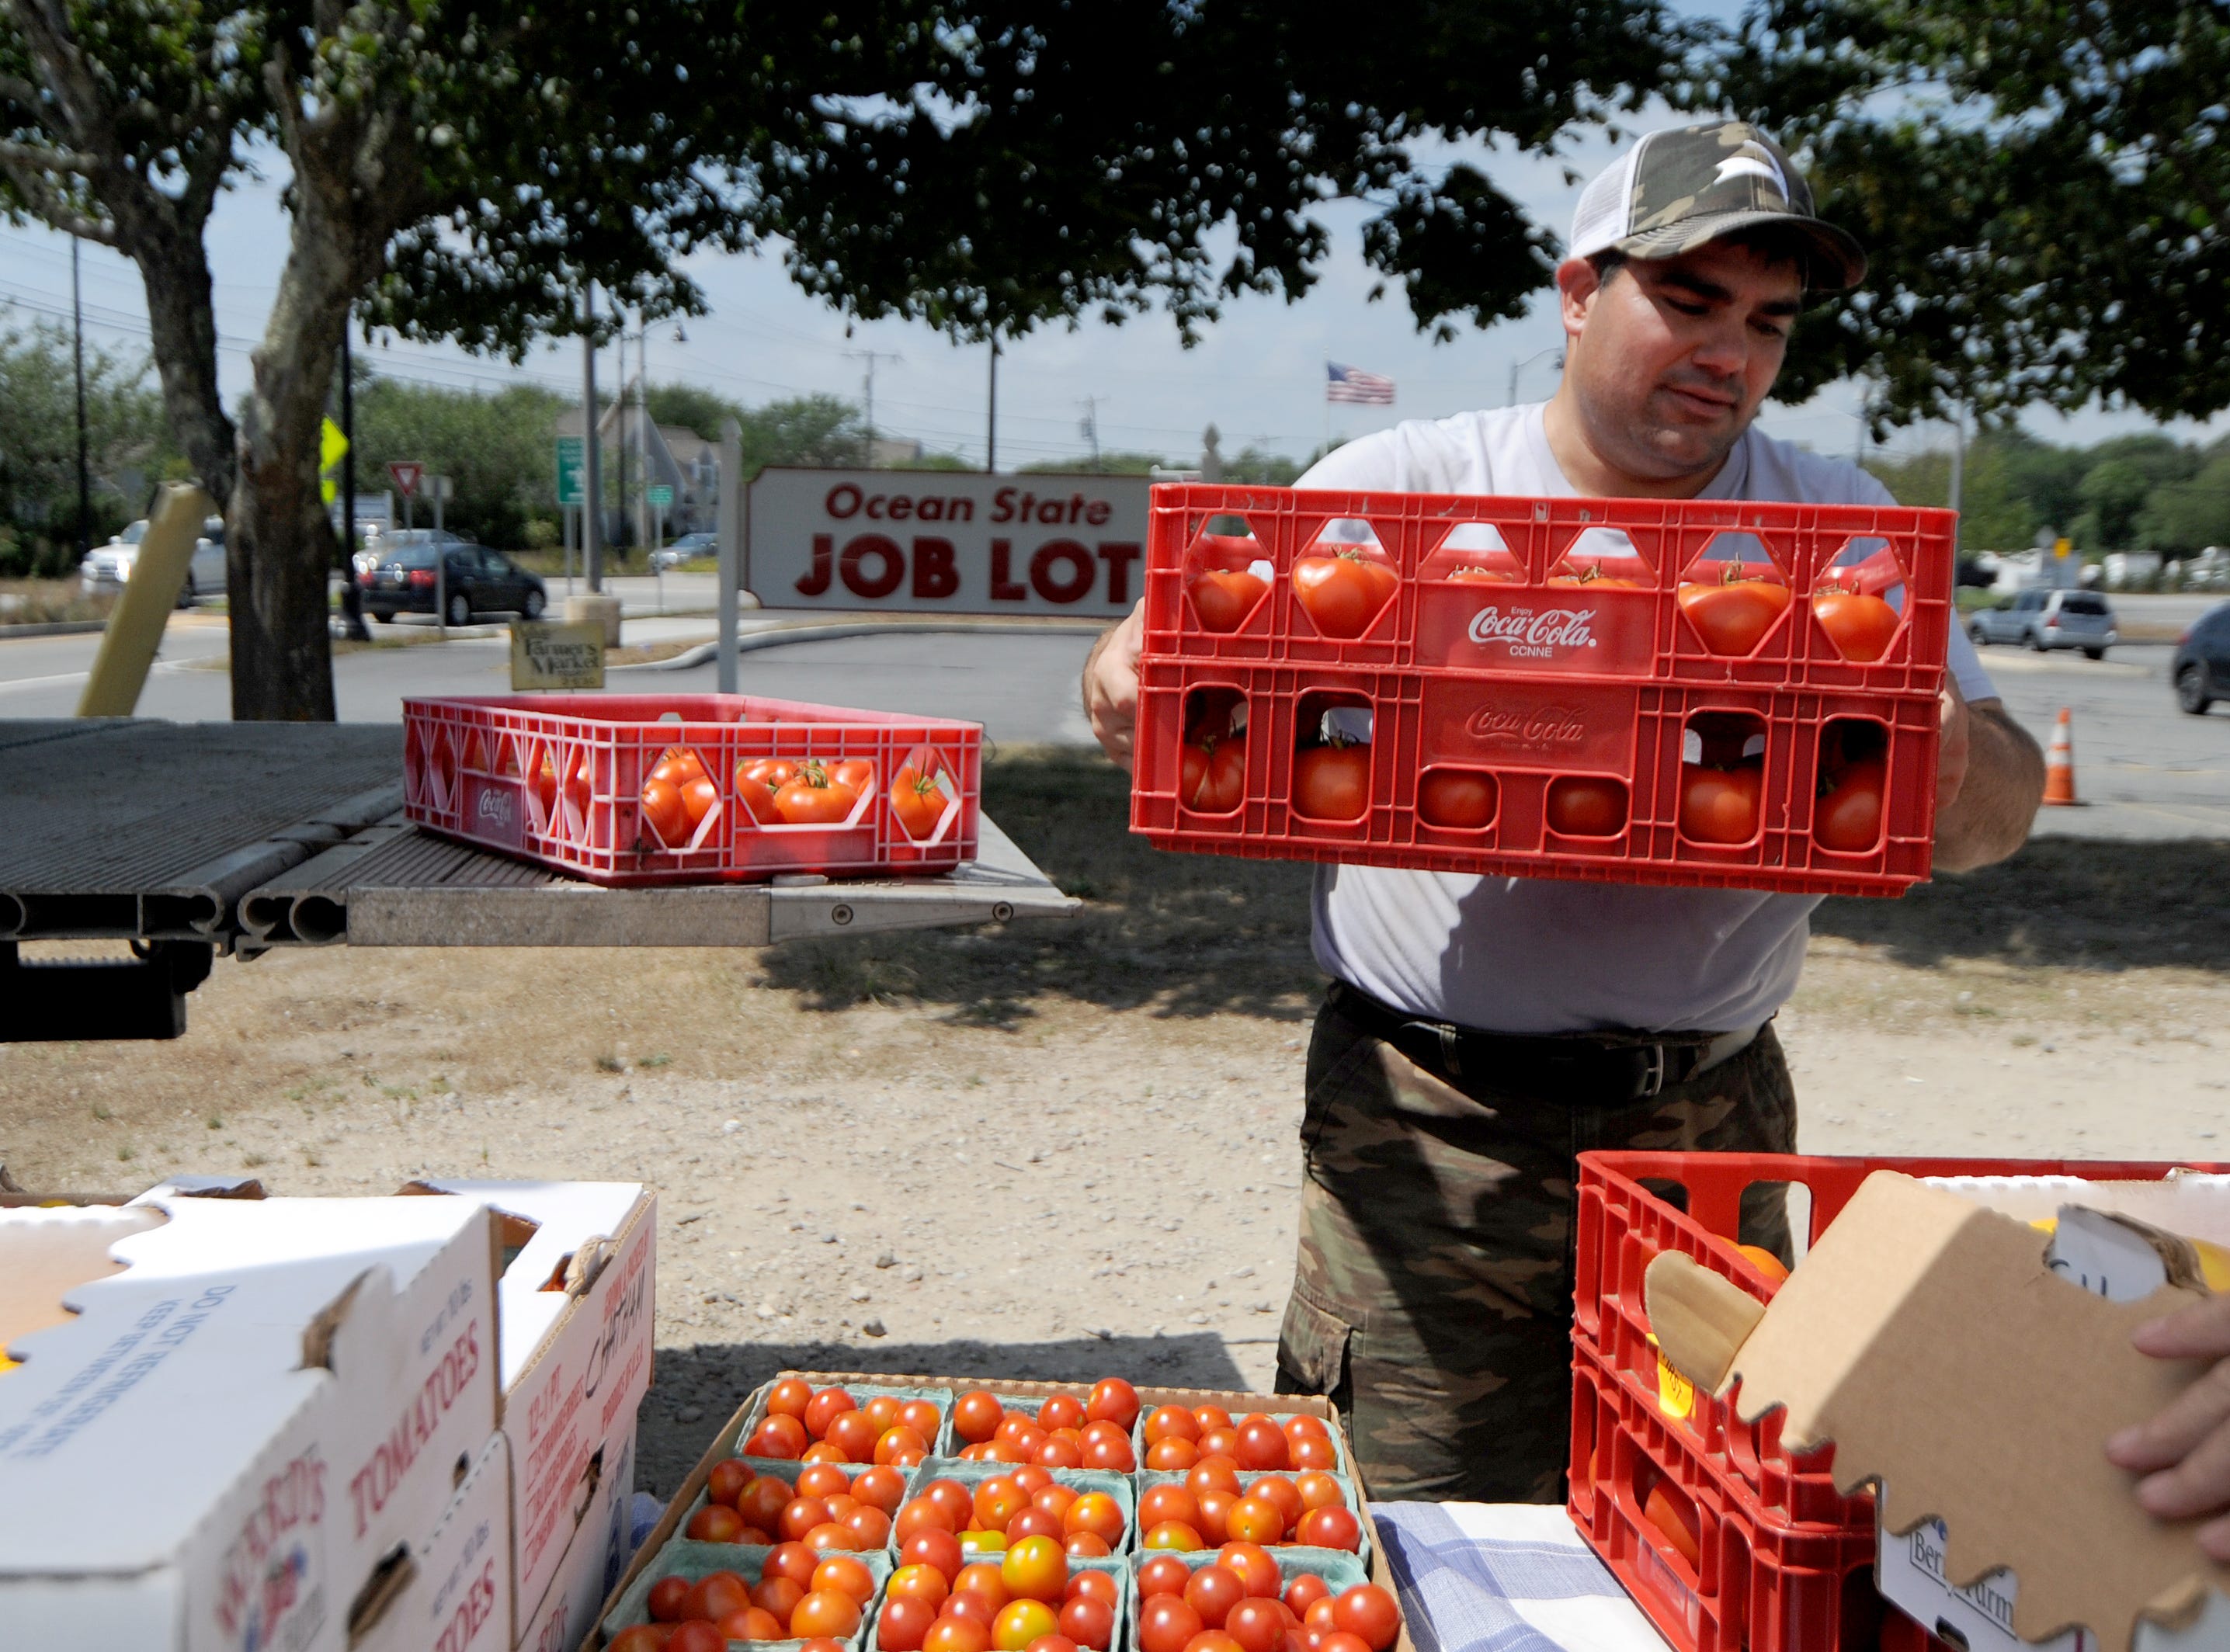 Program participant Joseph Capello helps to unload trays of tomatoes and other vegetables brought to the Chatham Farmers Market Tuesday, Aug. 9, 2022.